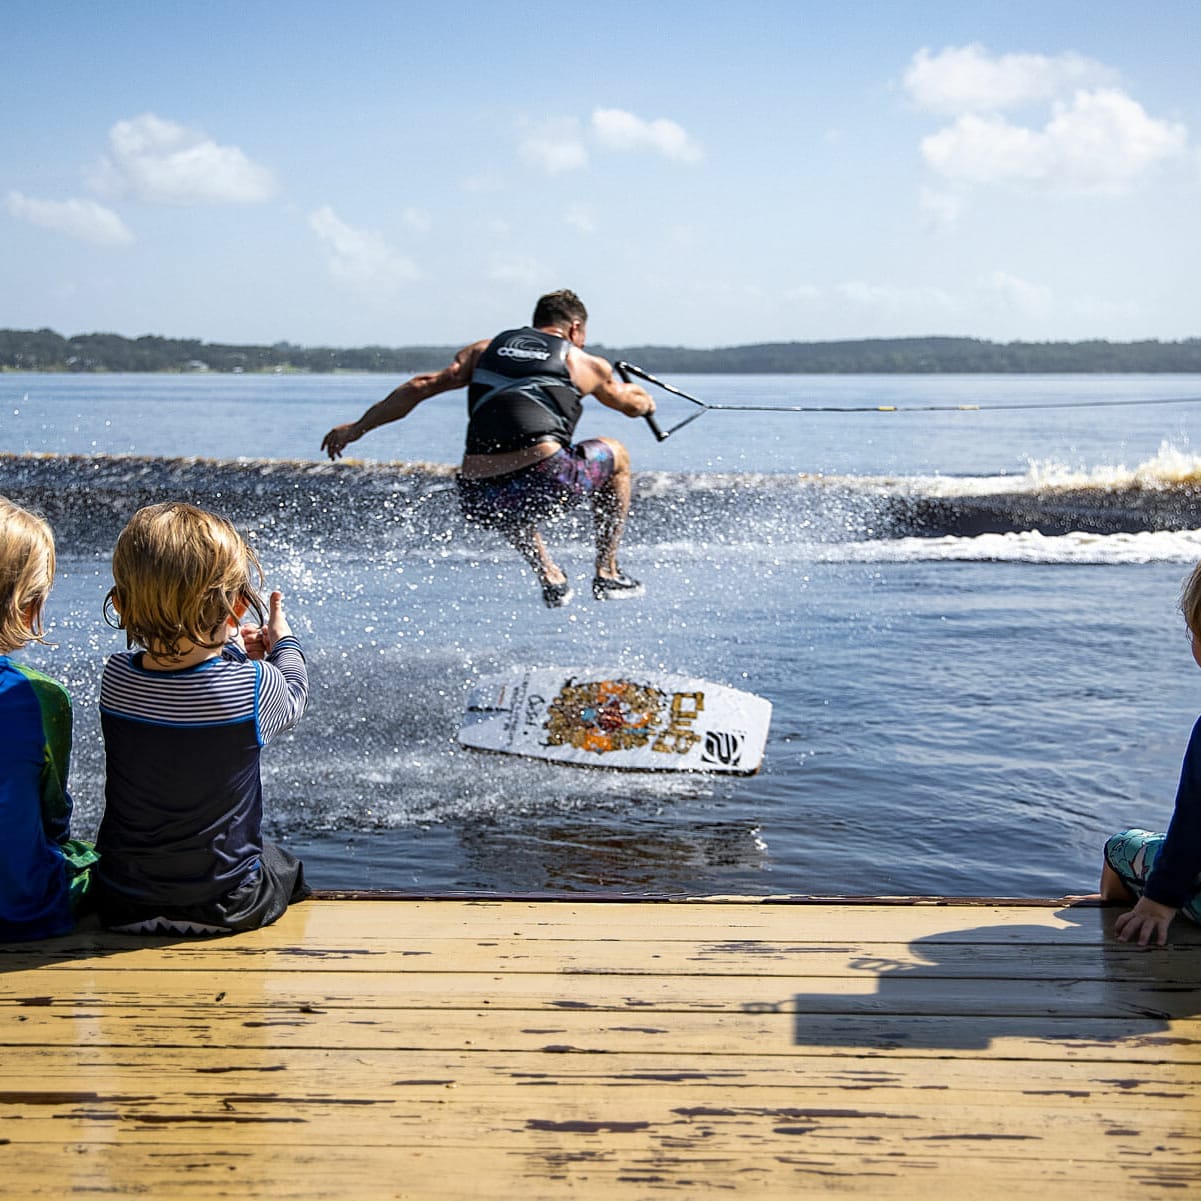 A group of children watching a man on a wakesurf board.